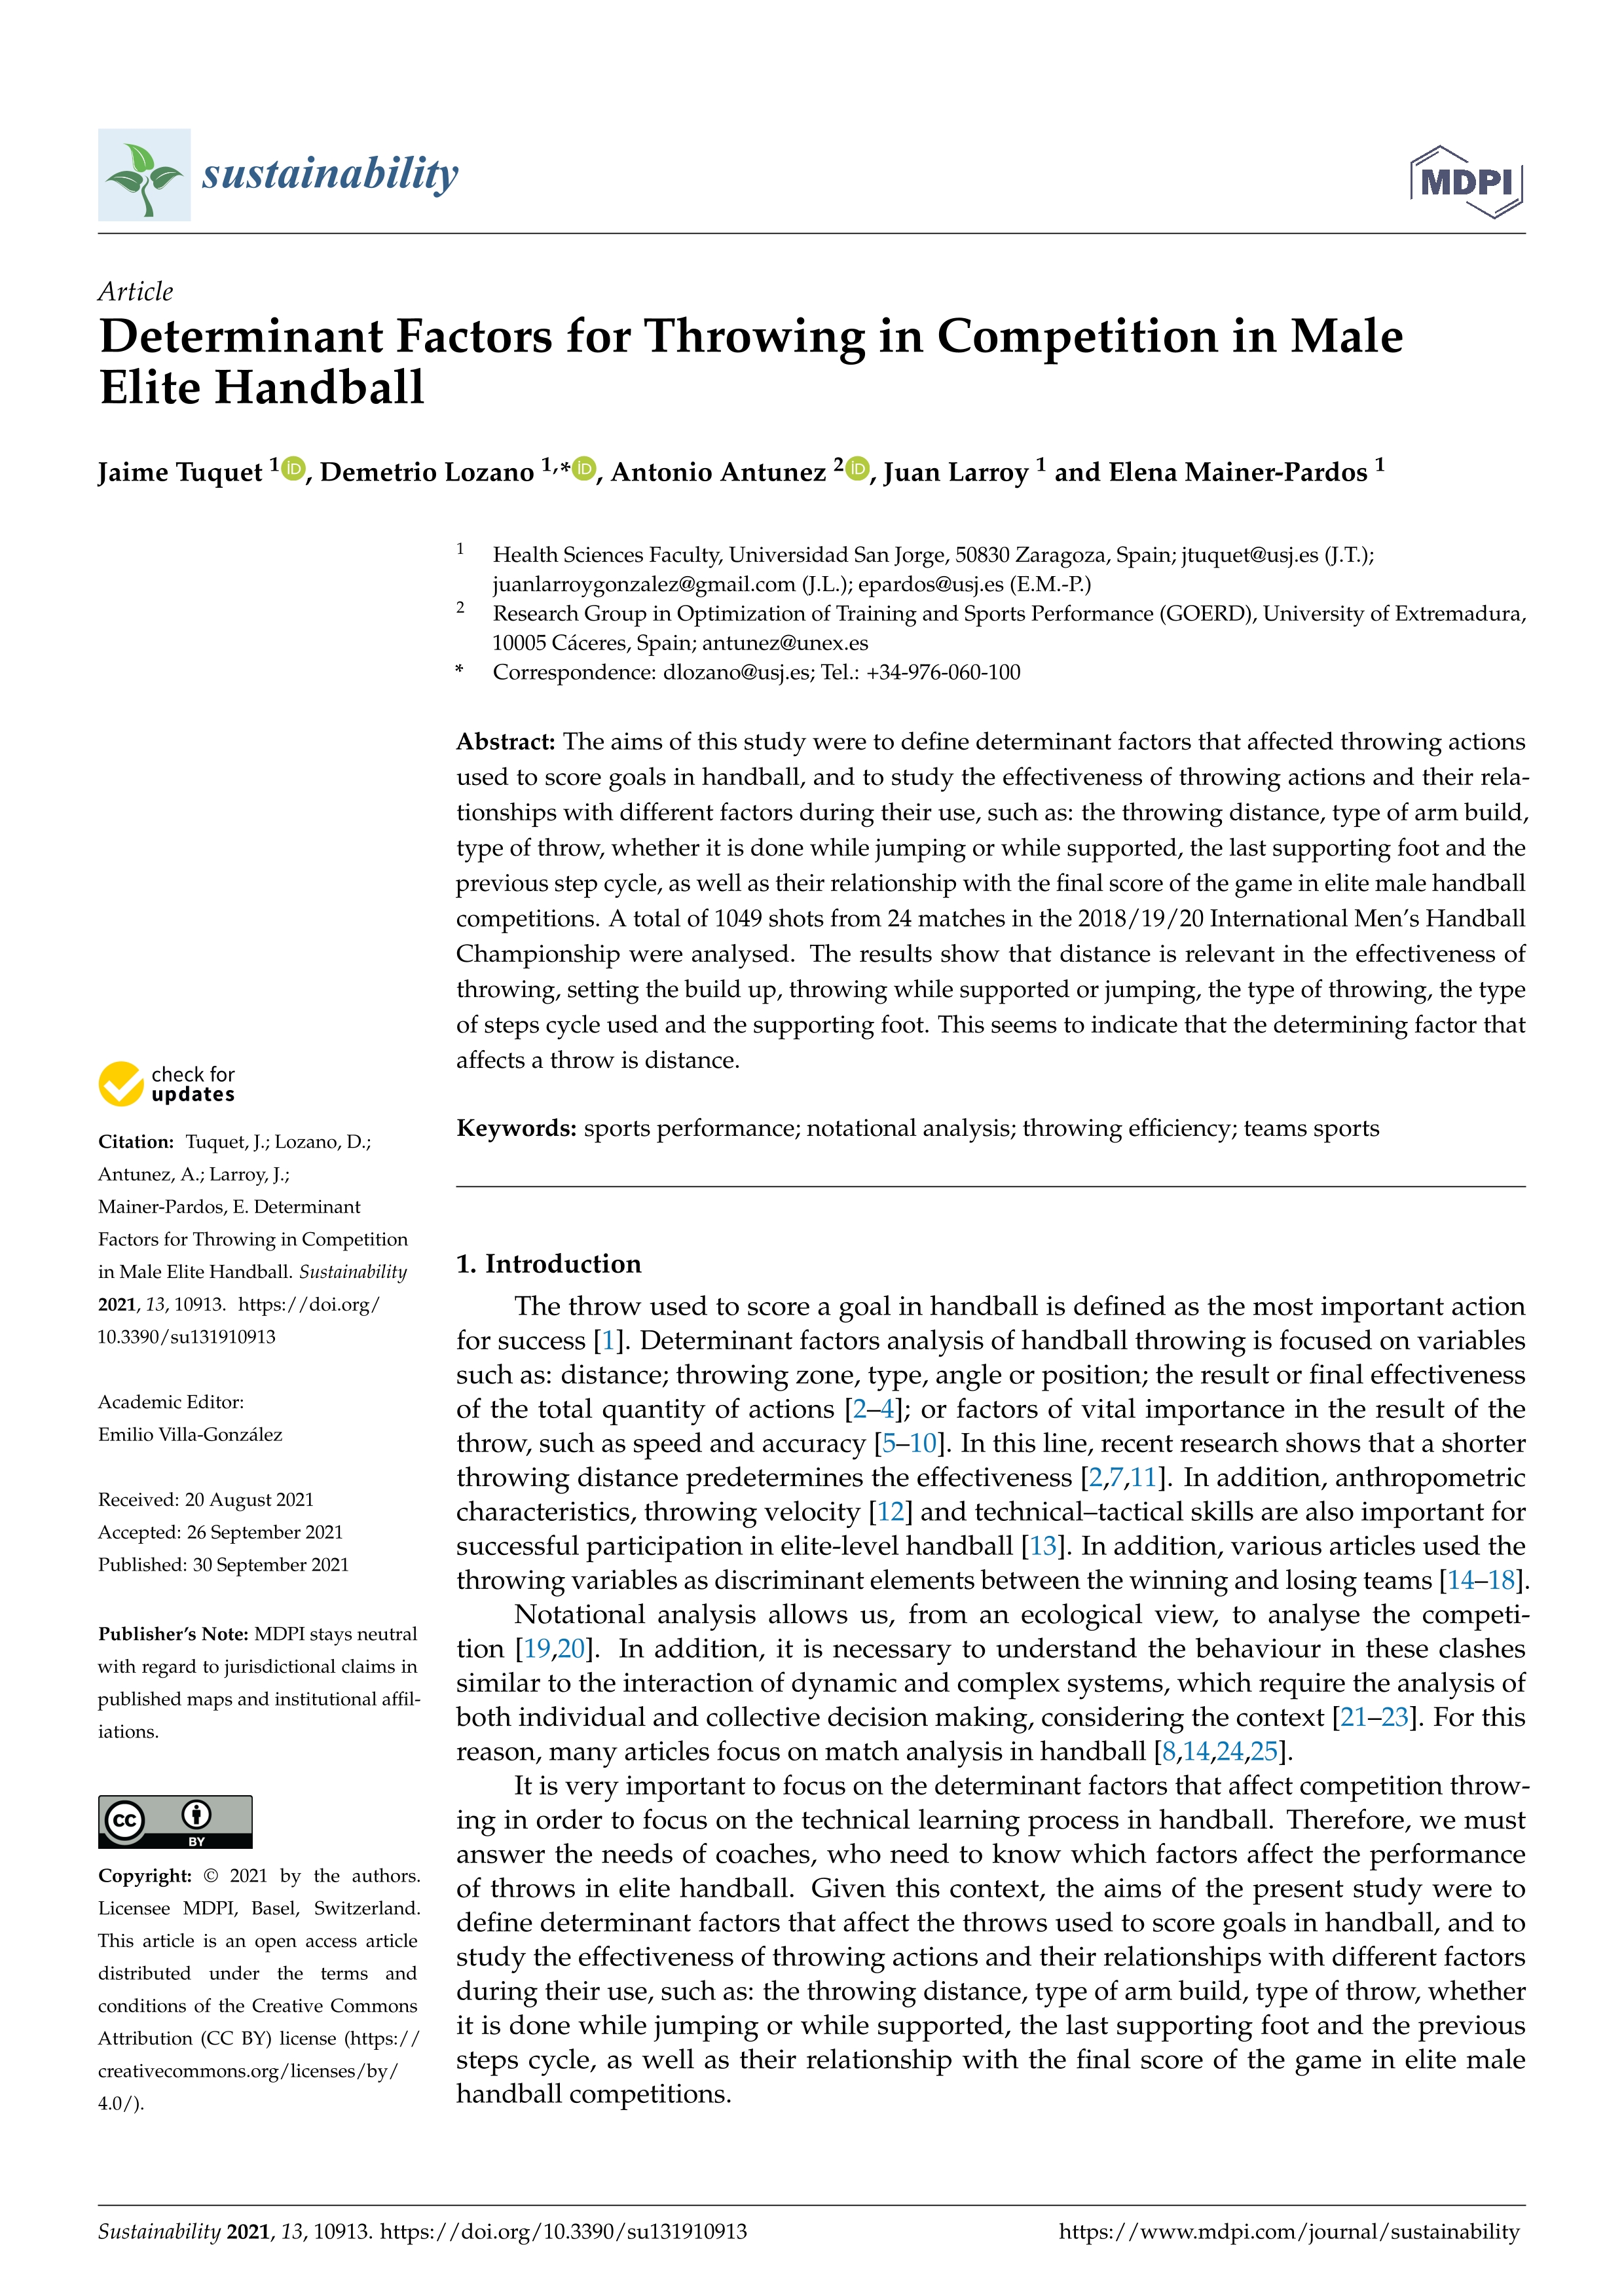 Determinant factors for throwing in competition in male elite handball